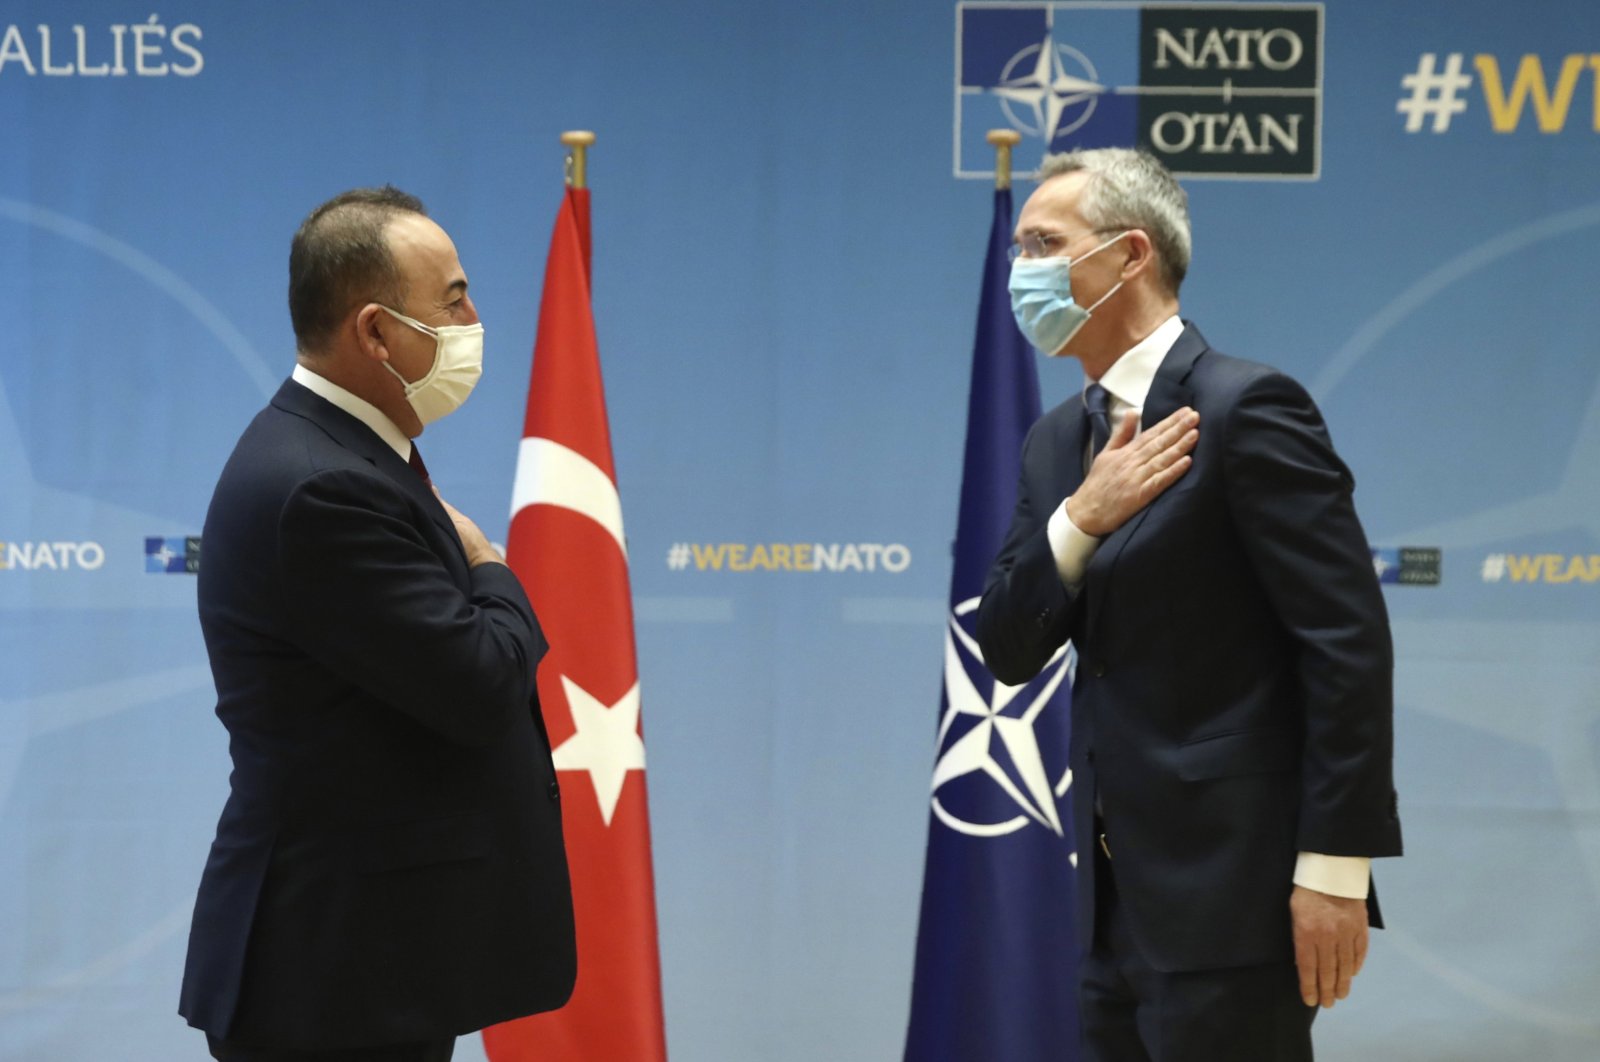 Foreign Minister Mevlüt Çavuşoğlu and NATO Secretary-General Jens Stoltenberg greet each other prior to their meeting, in Brussels, Belgium, Jan. 22, 2021. (AP)